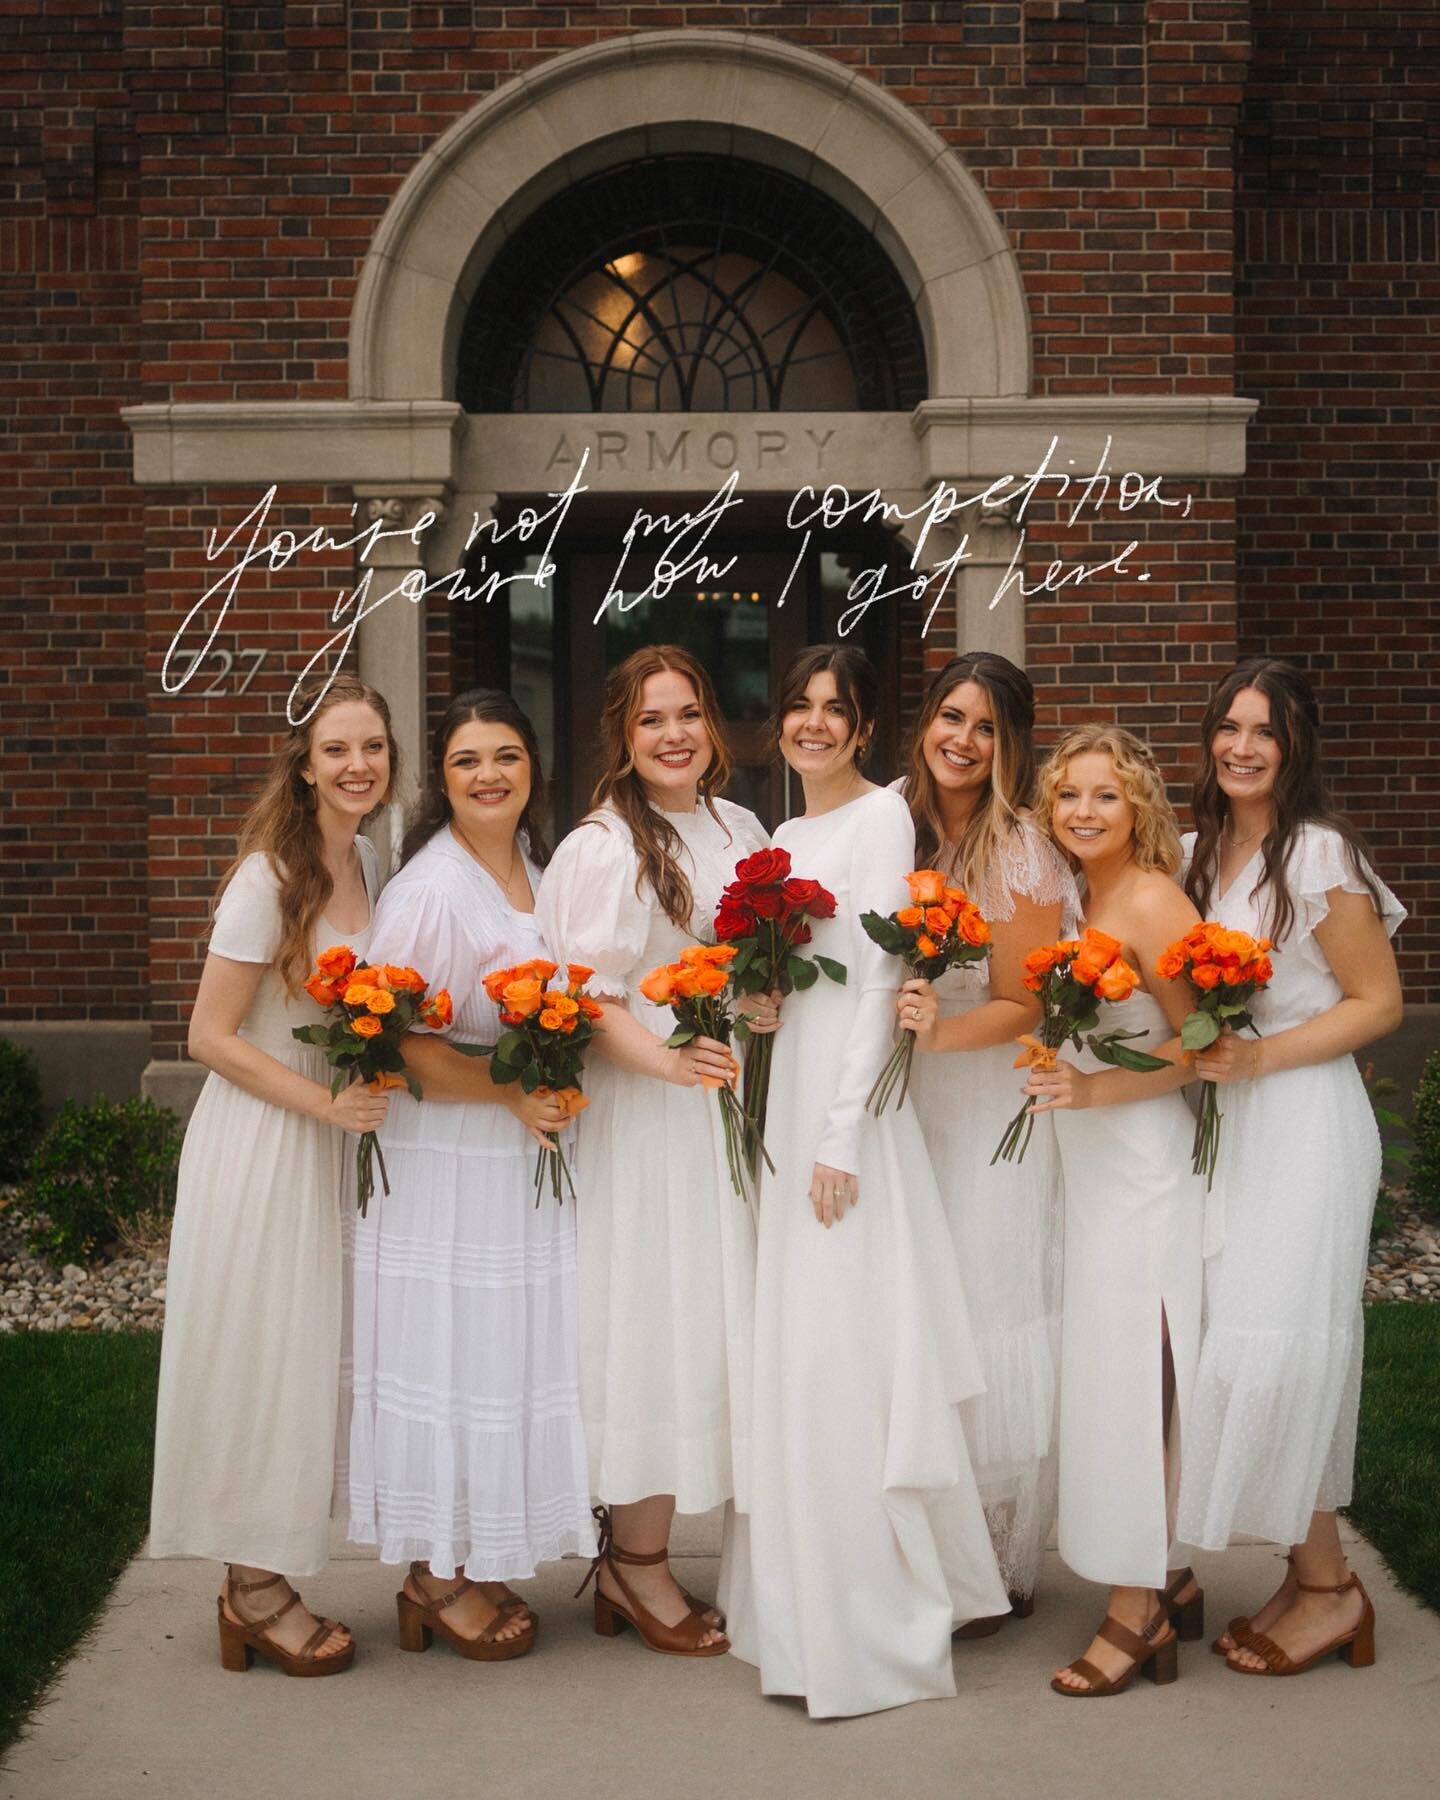 Her bridal identity is just as important as yours.

Everyone will tell you differently - it&rsquo;s your day, your marriage, all yours.

These women made me into the bride I am, so it was only fitting that they joined me in white when I said yes to A